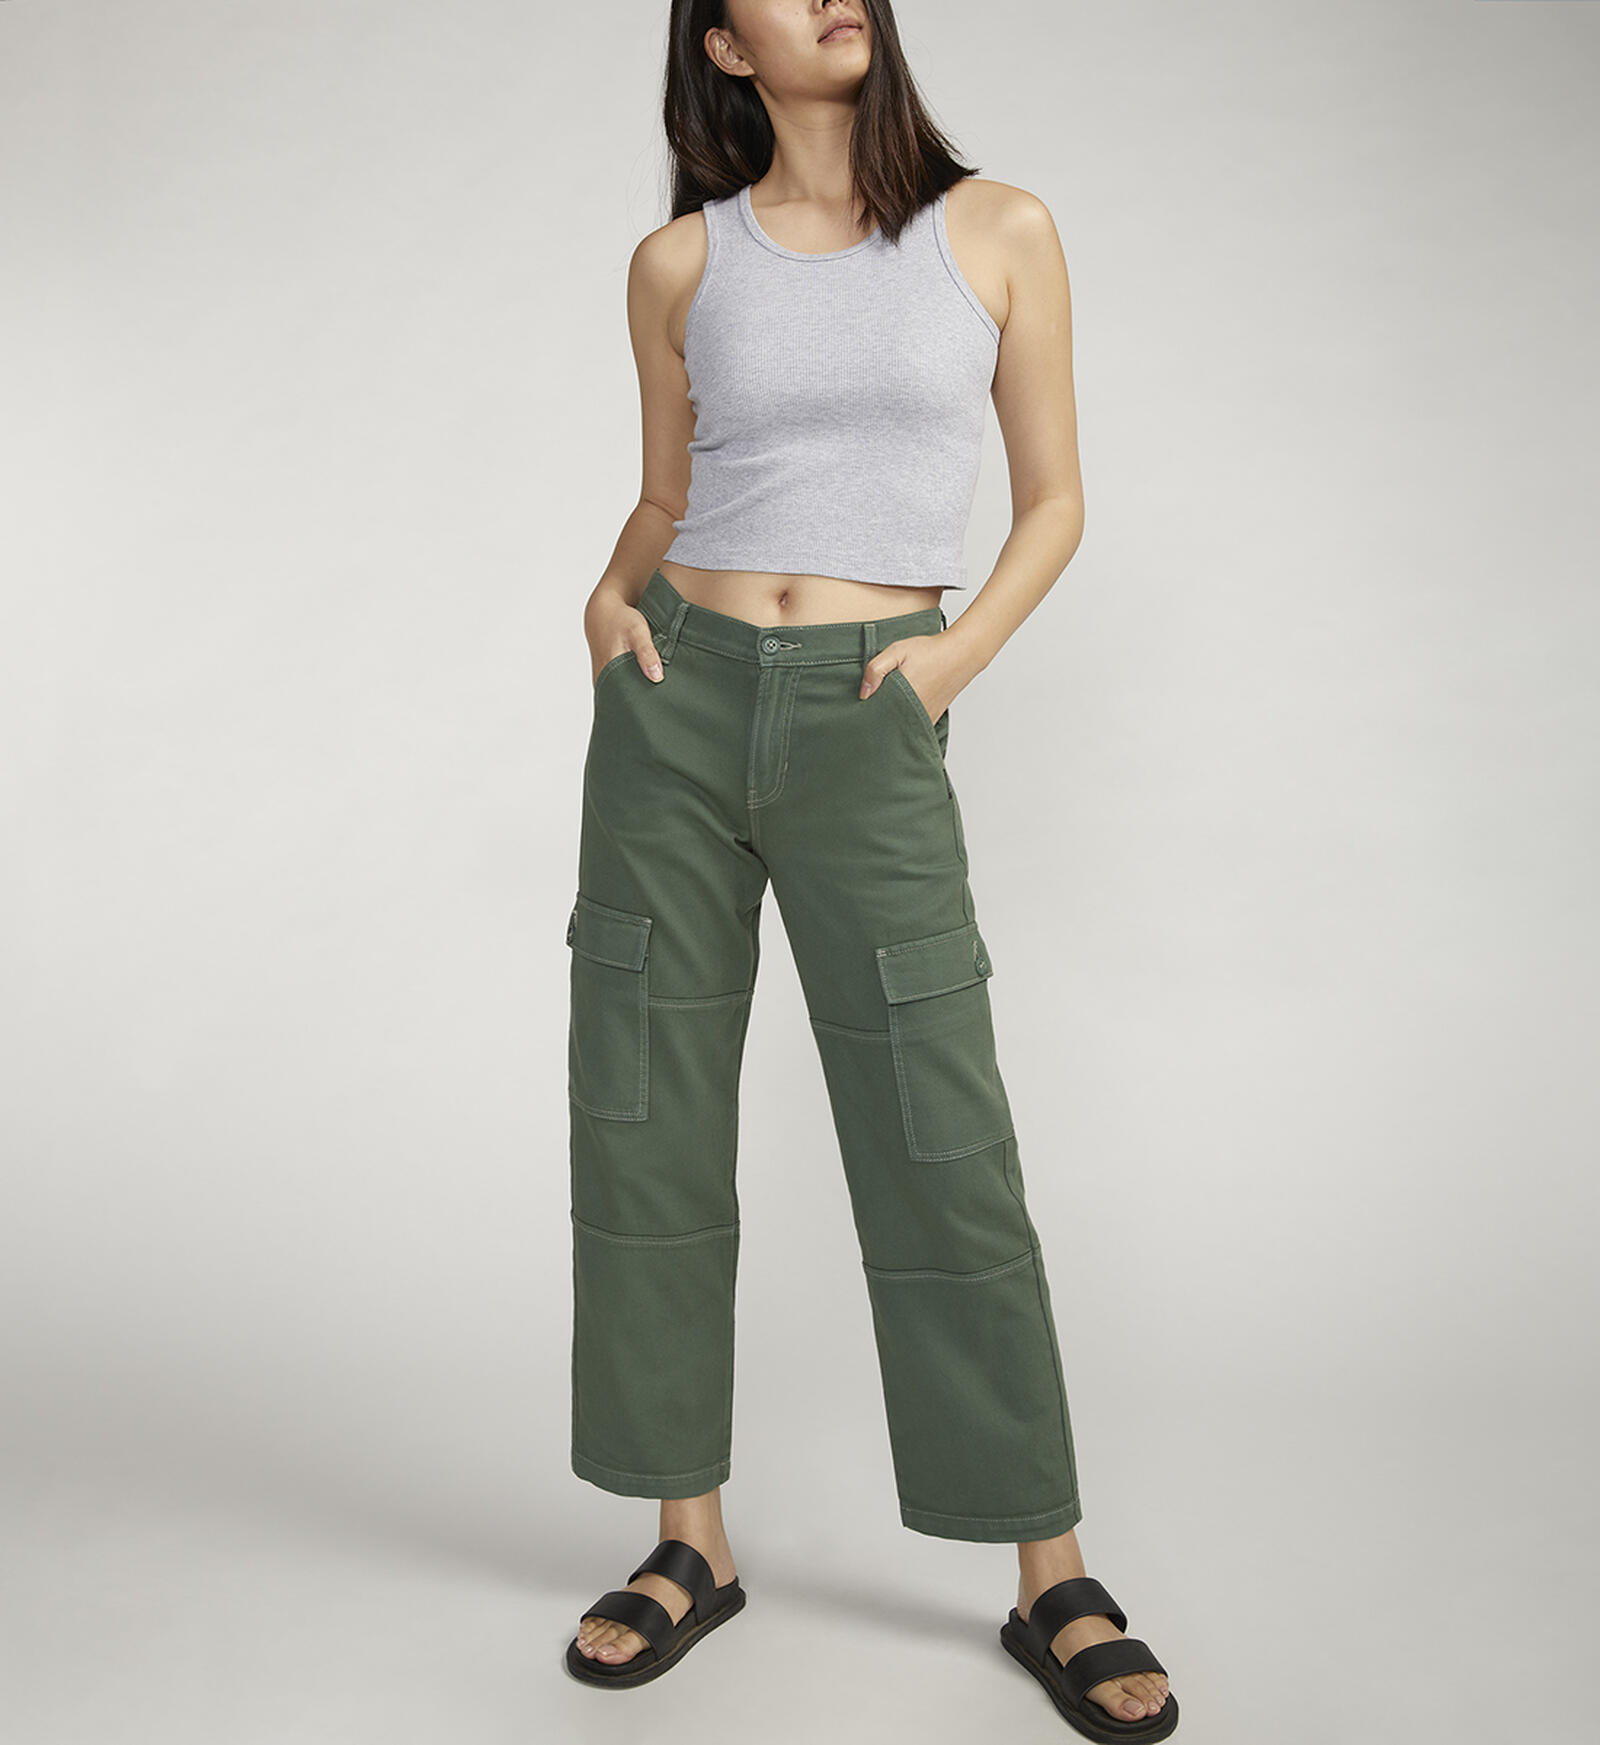 Buy Relaxed Cargo Pant for CAD 98.00